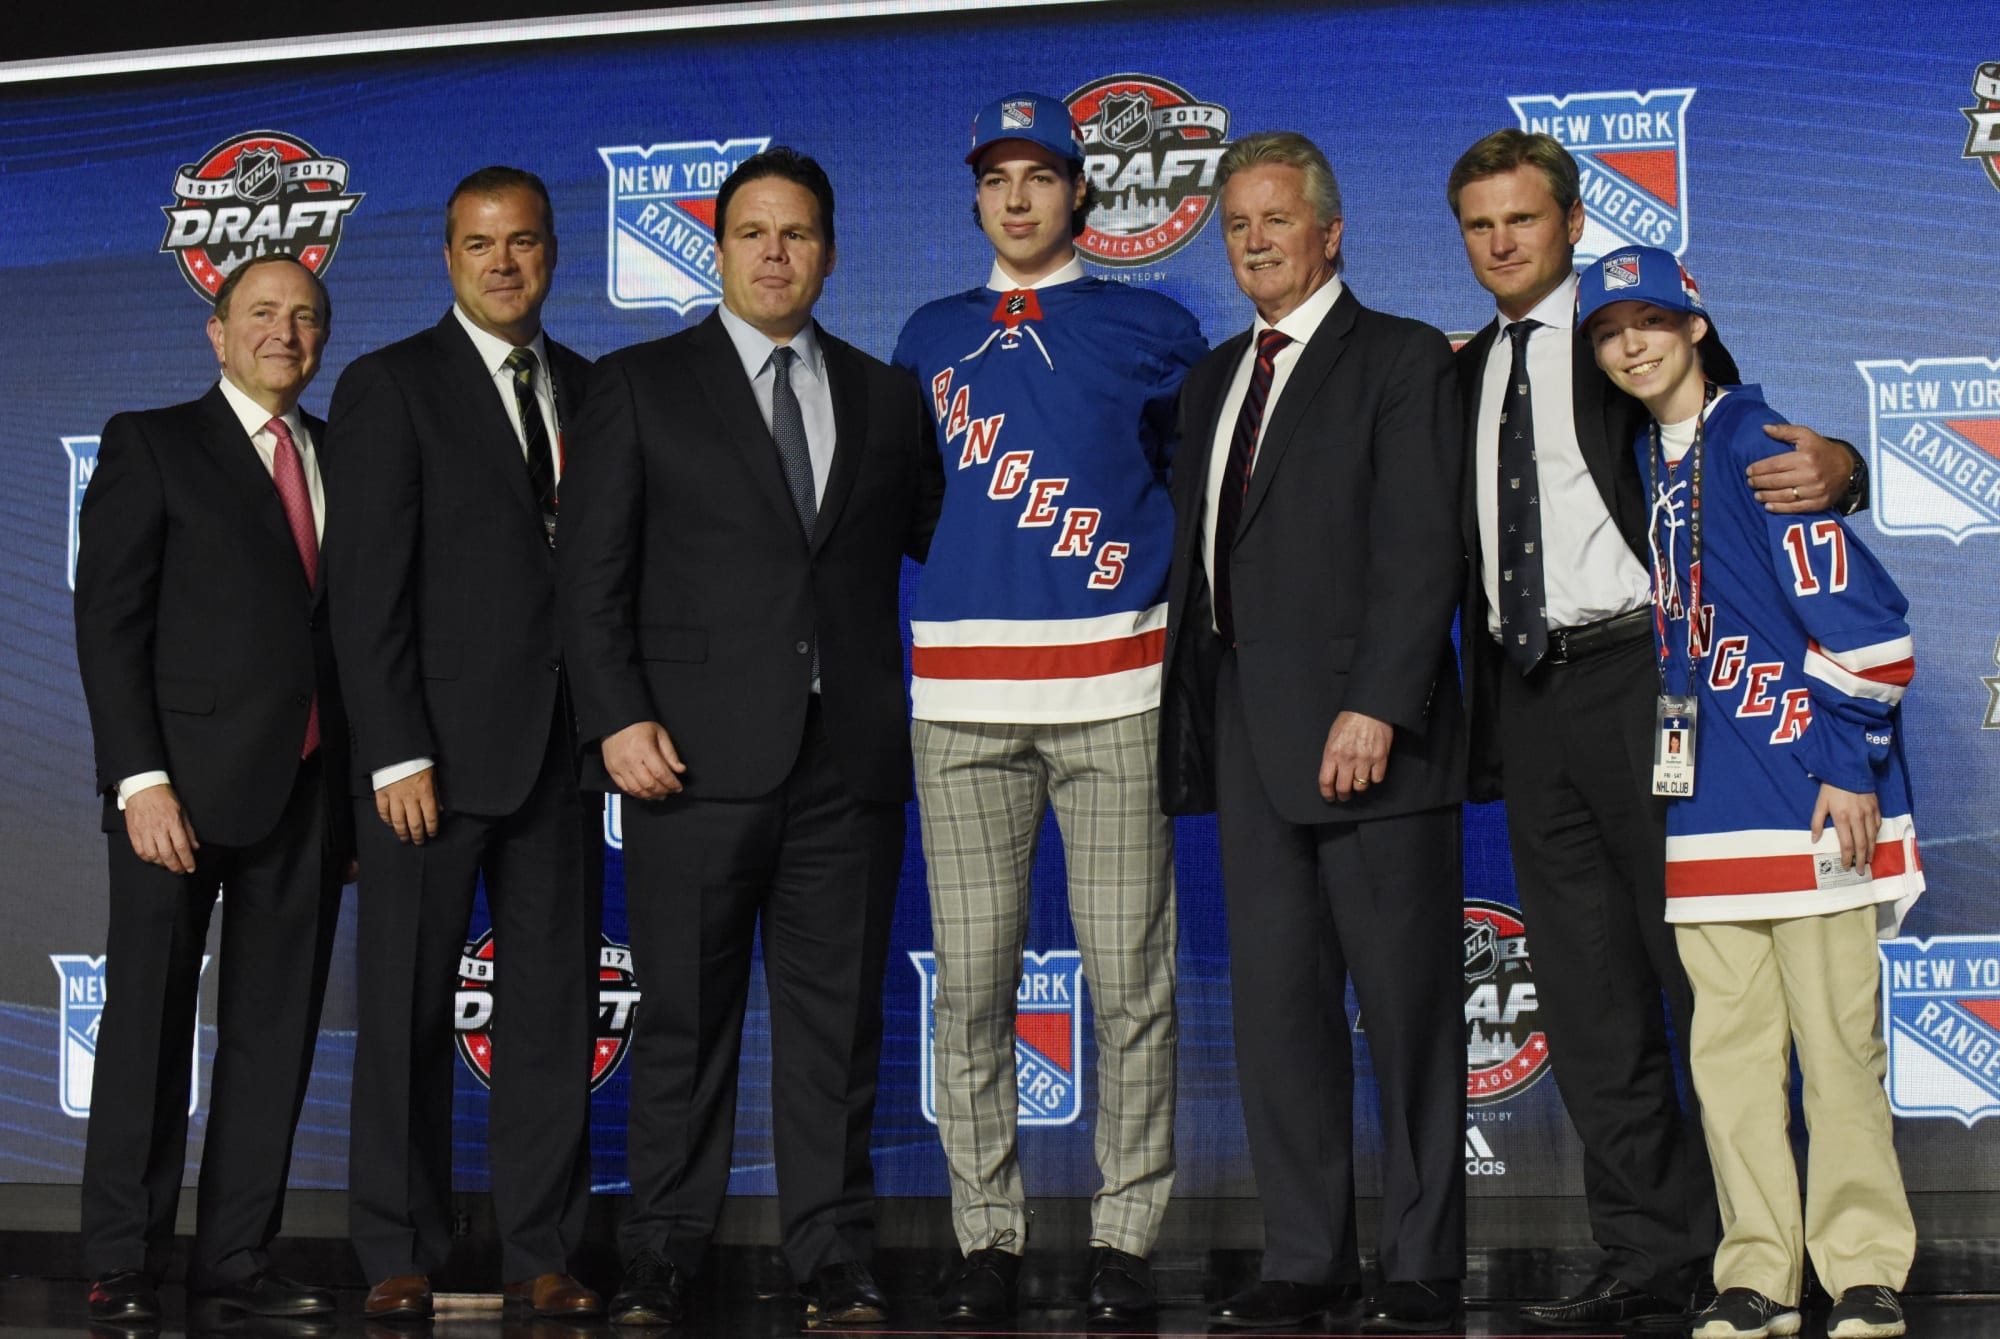 What can the New York Rangers really expect from the NHL Draft?